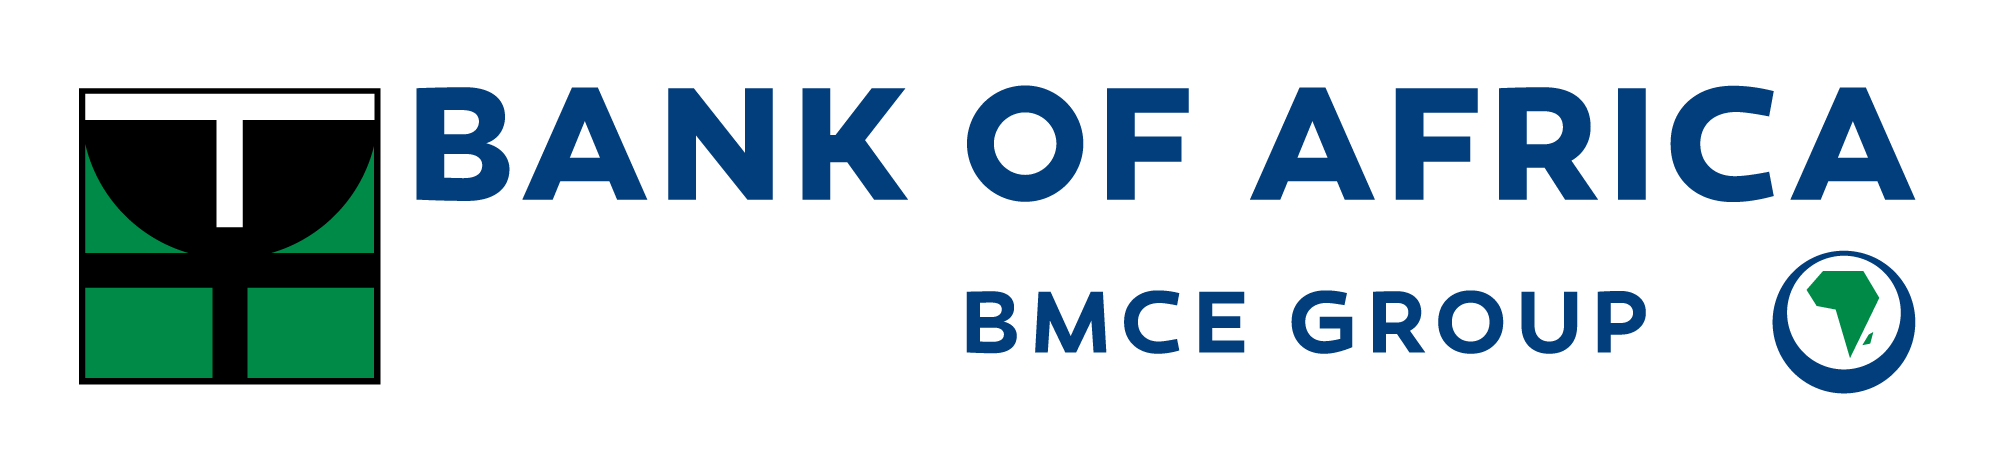 BOA bank of africa.png